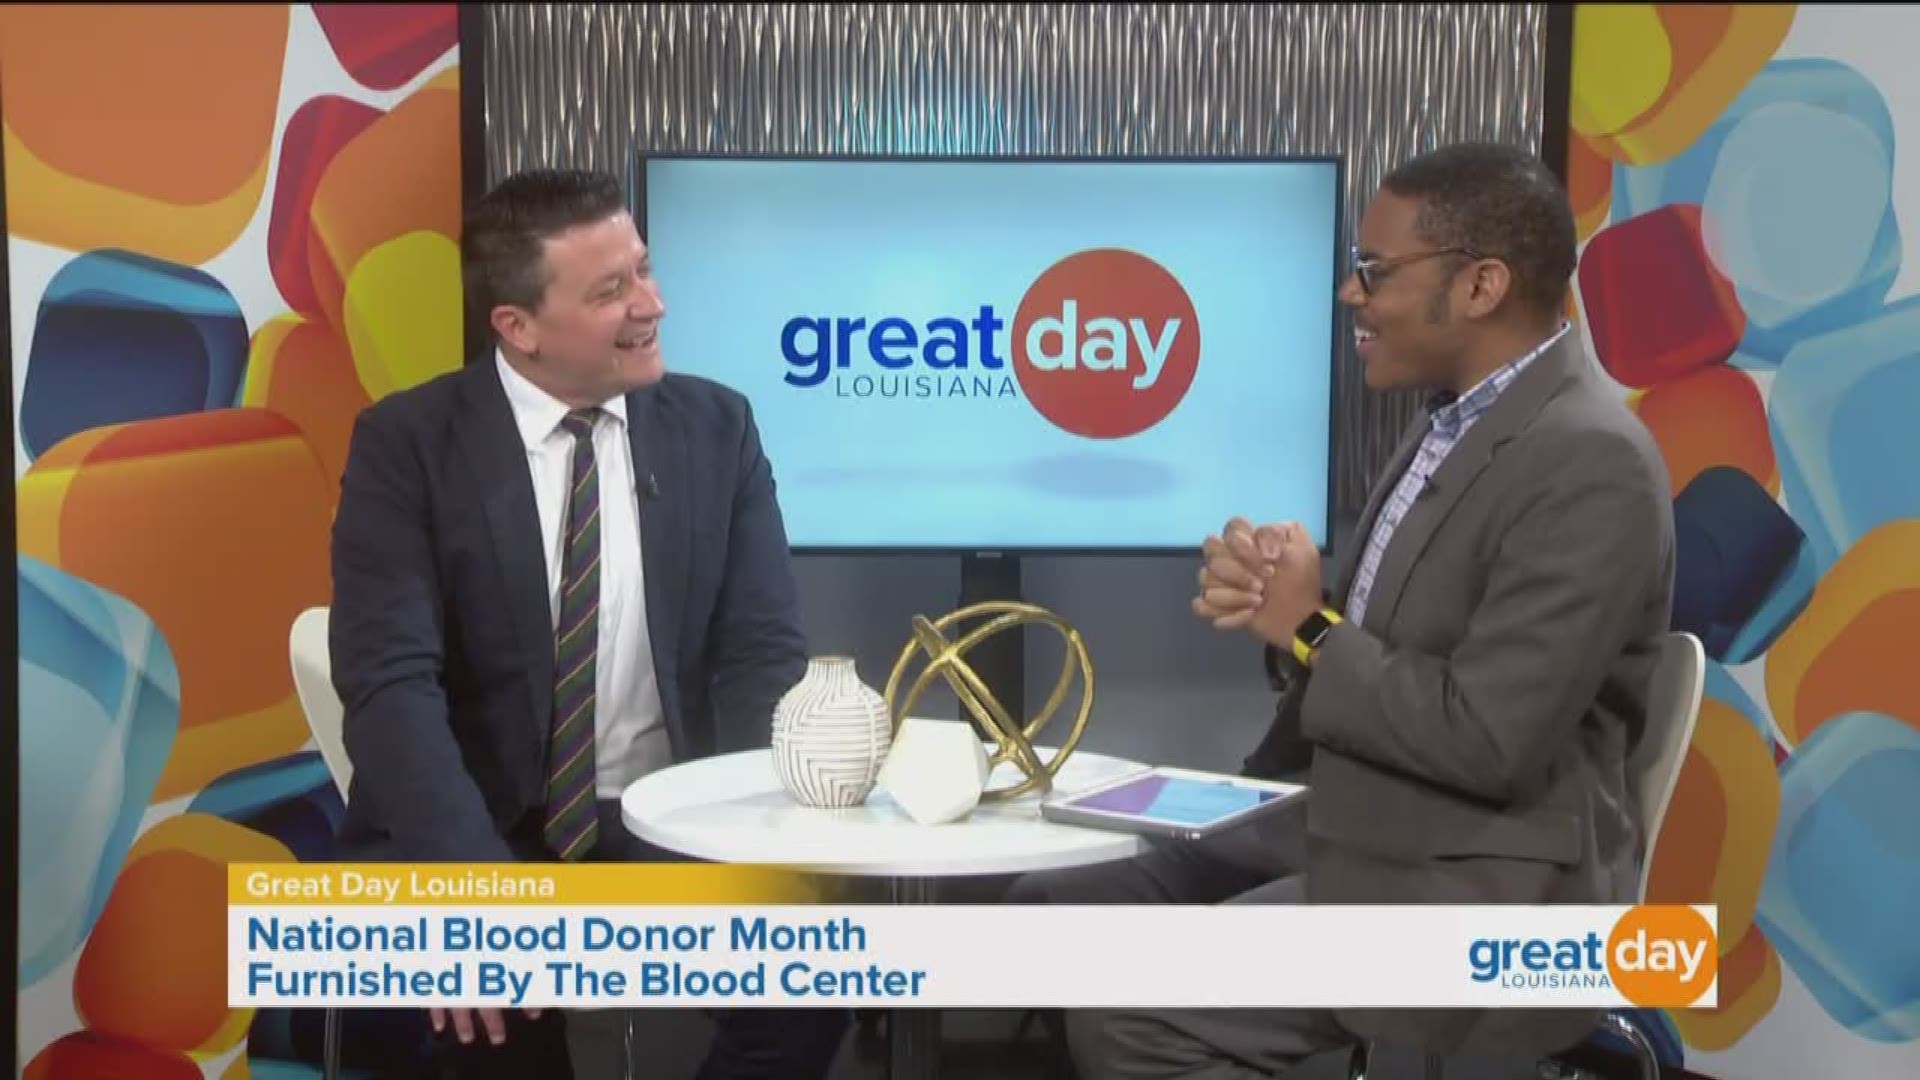 Paul Adams with The Blood Center discussed the need for blood donations and cleared up some myths.